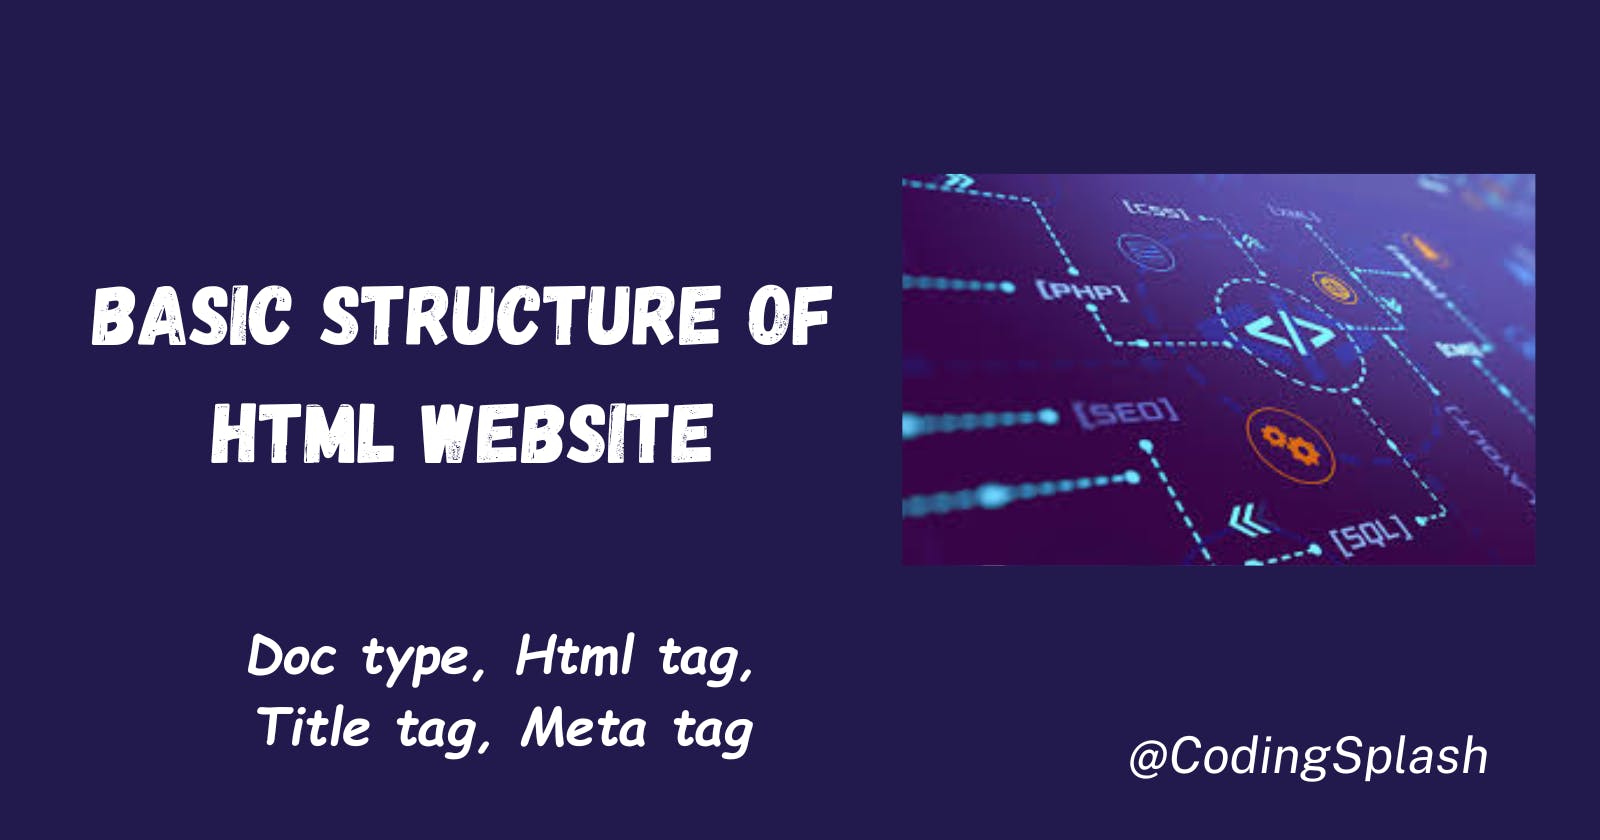 Basic Structure of Html Website